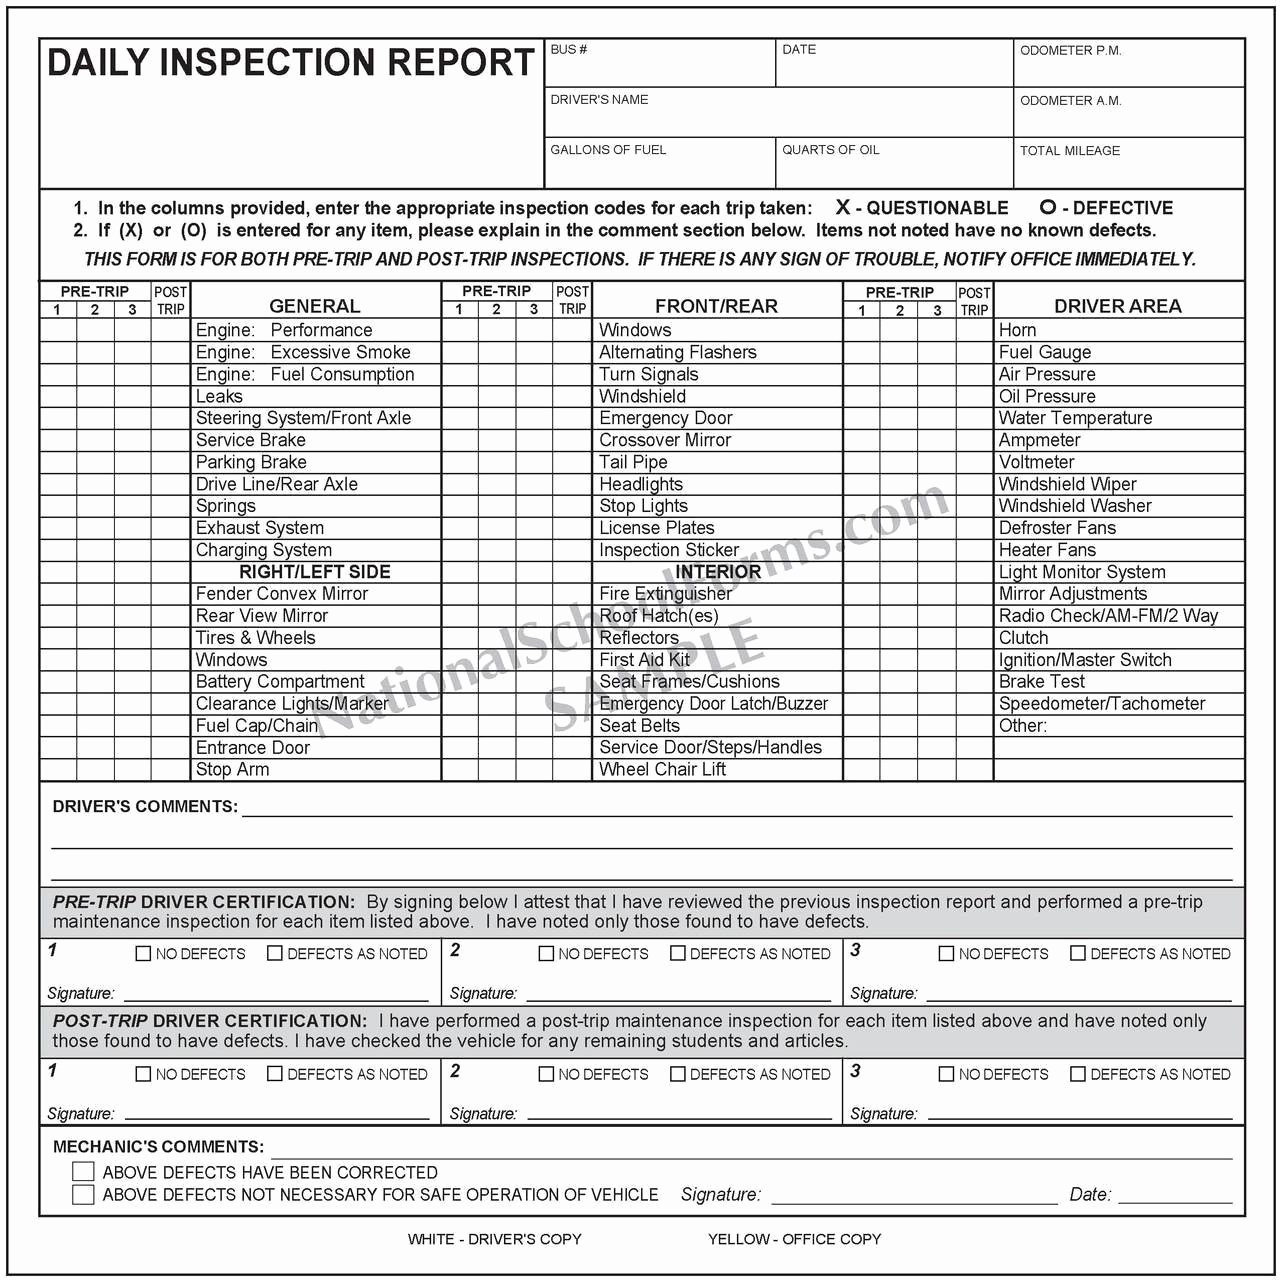 Daily Inspection Report with Pre and Post Trip